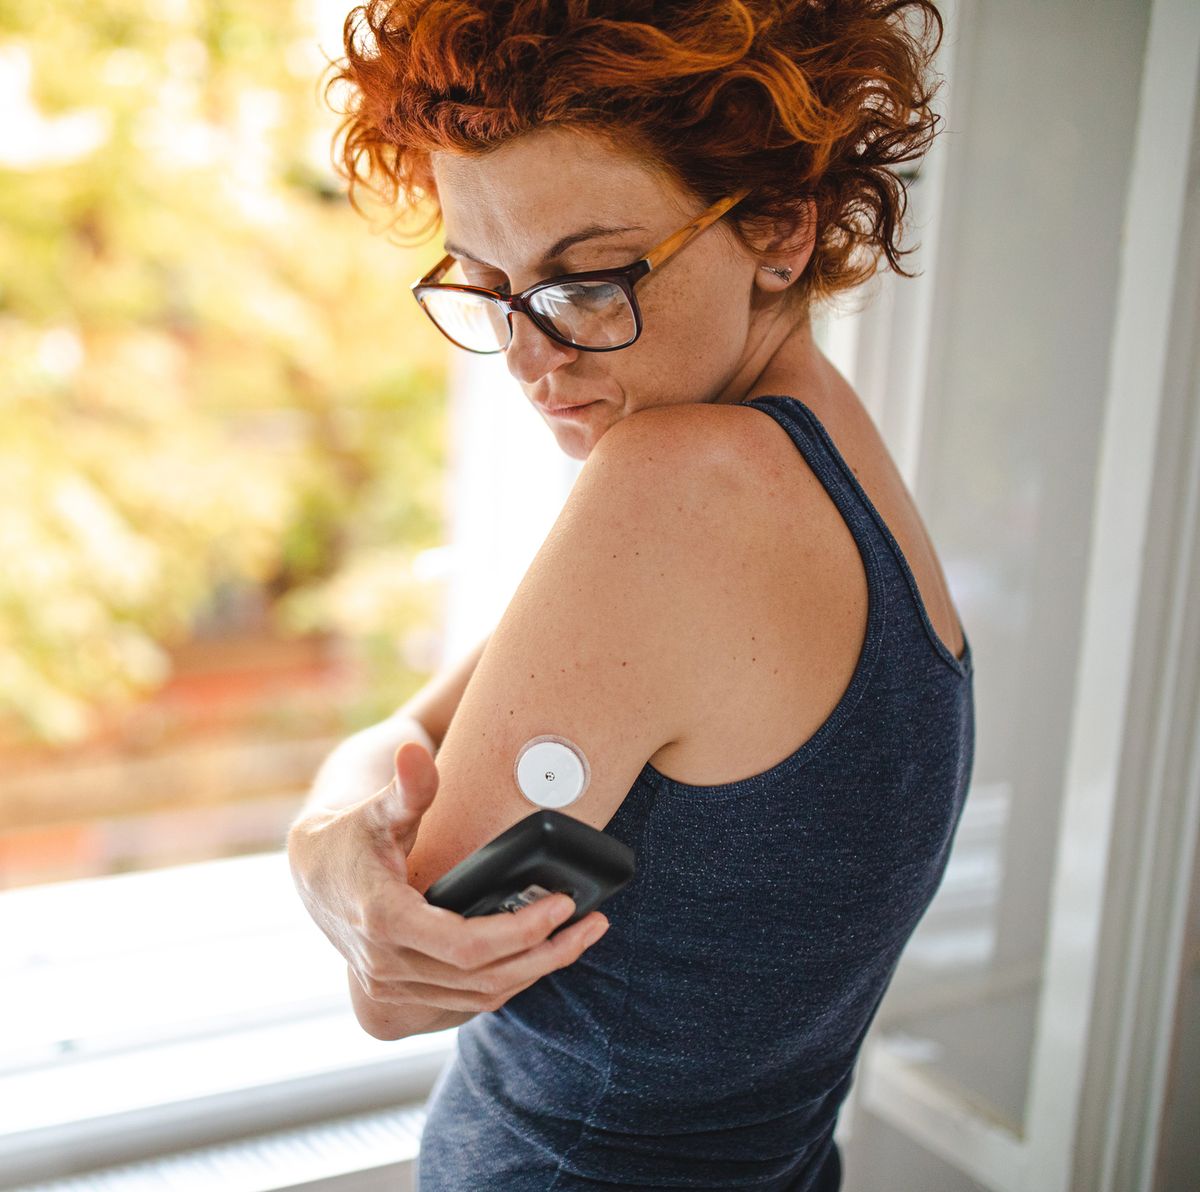 putting reader device over it to see the current blood sugar level